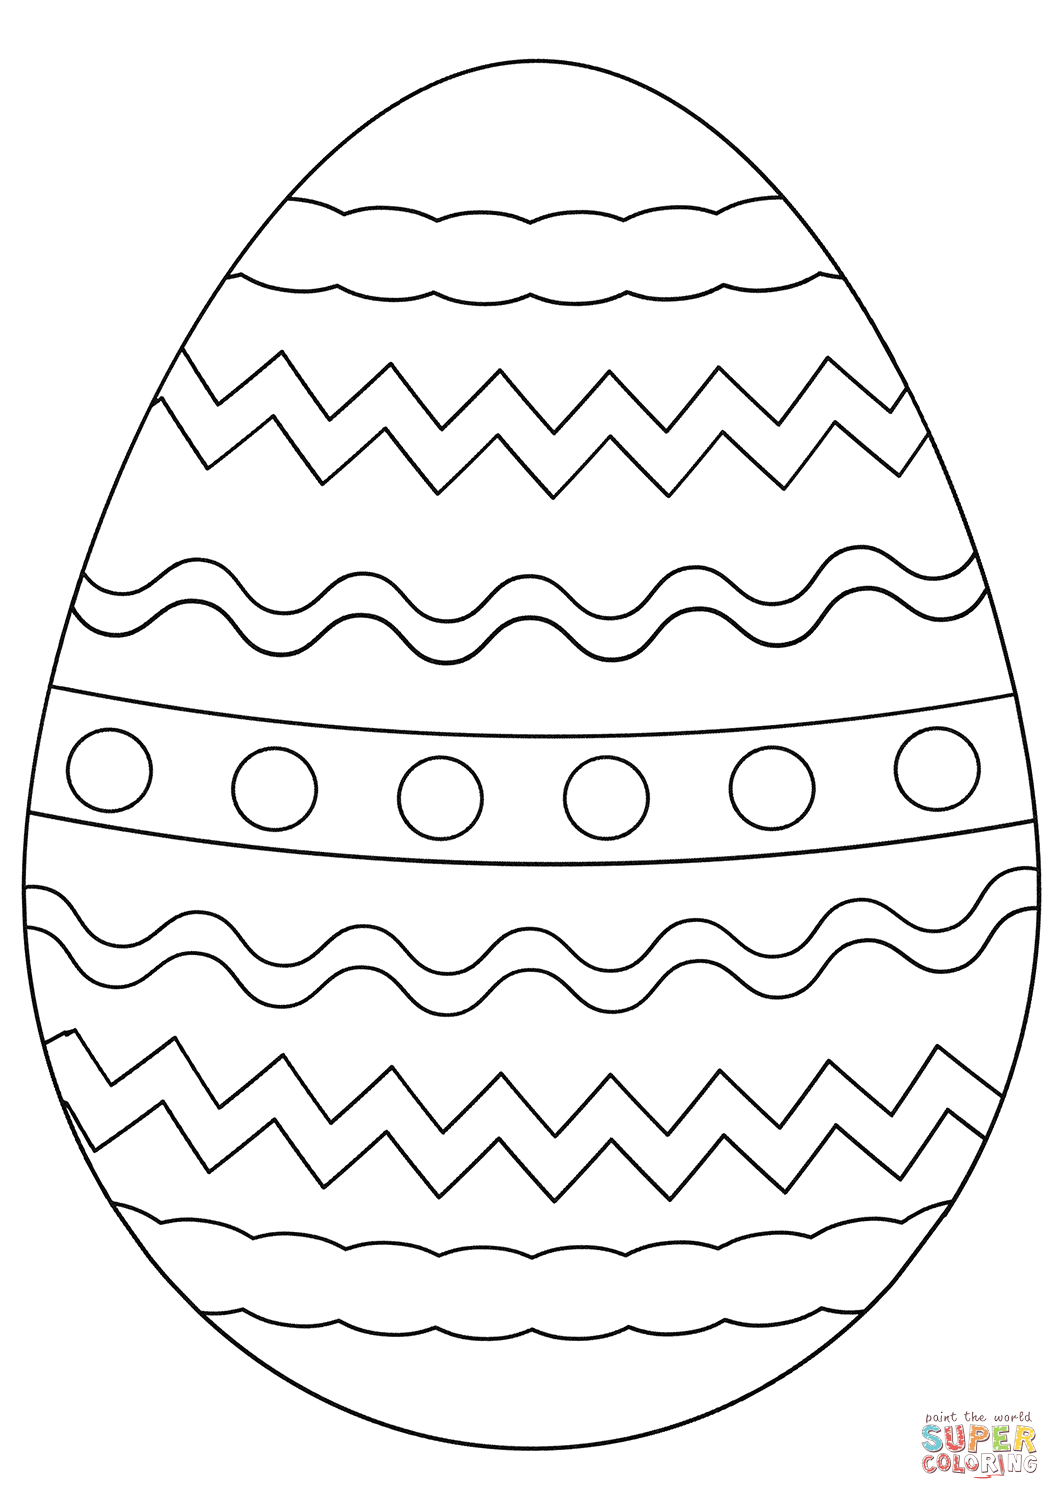 Easter egg coloring page free printable coloring pages